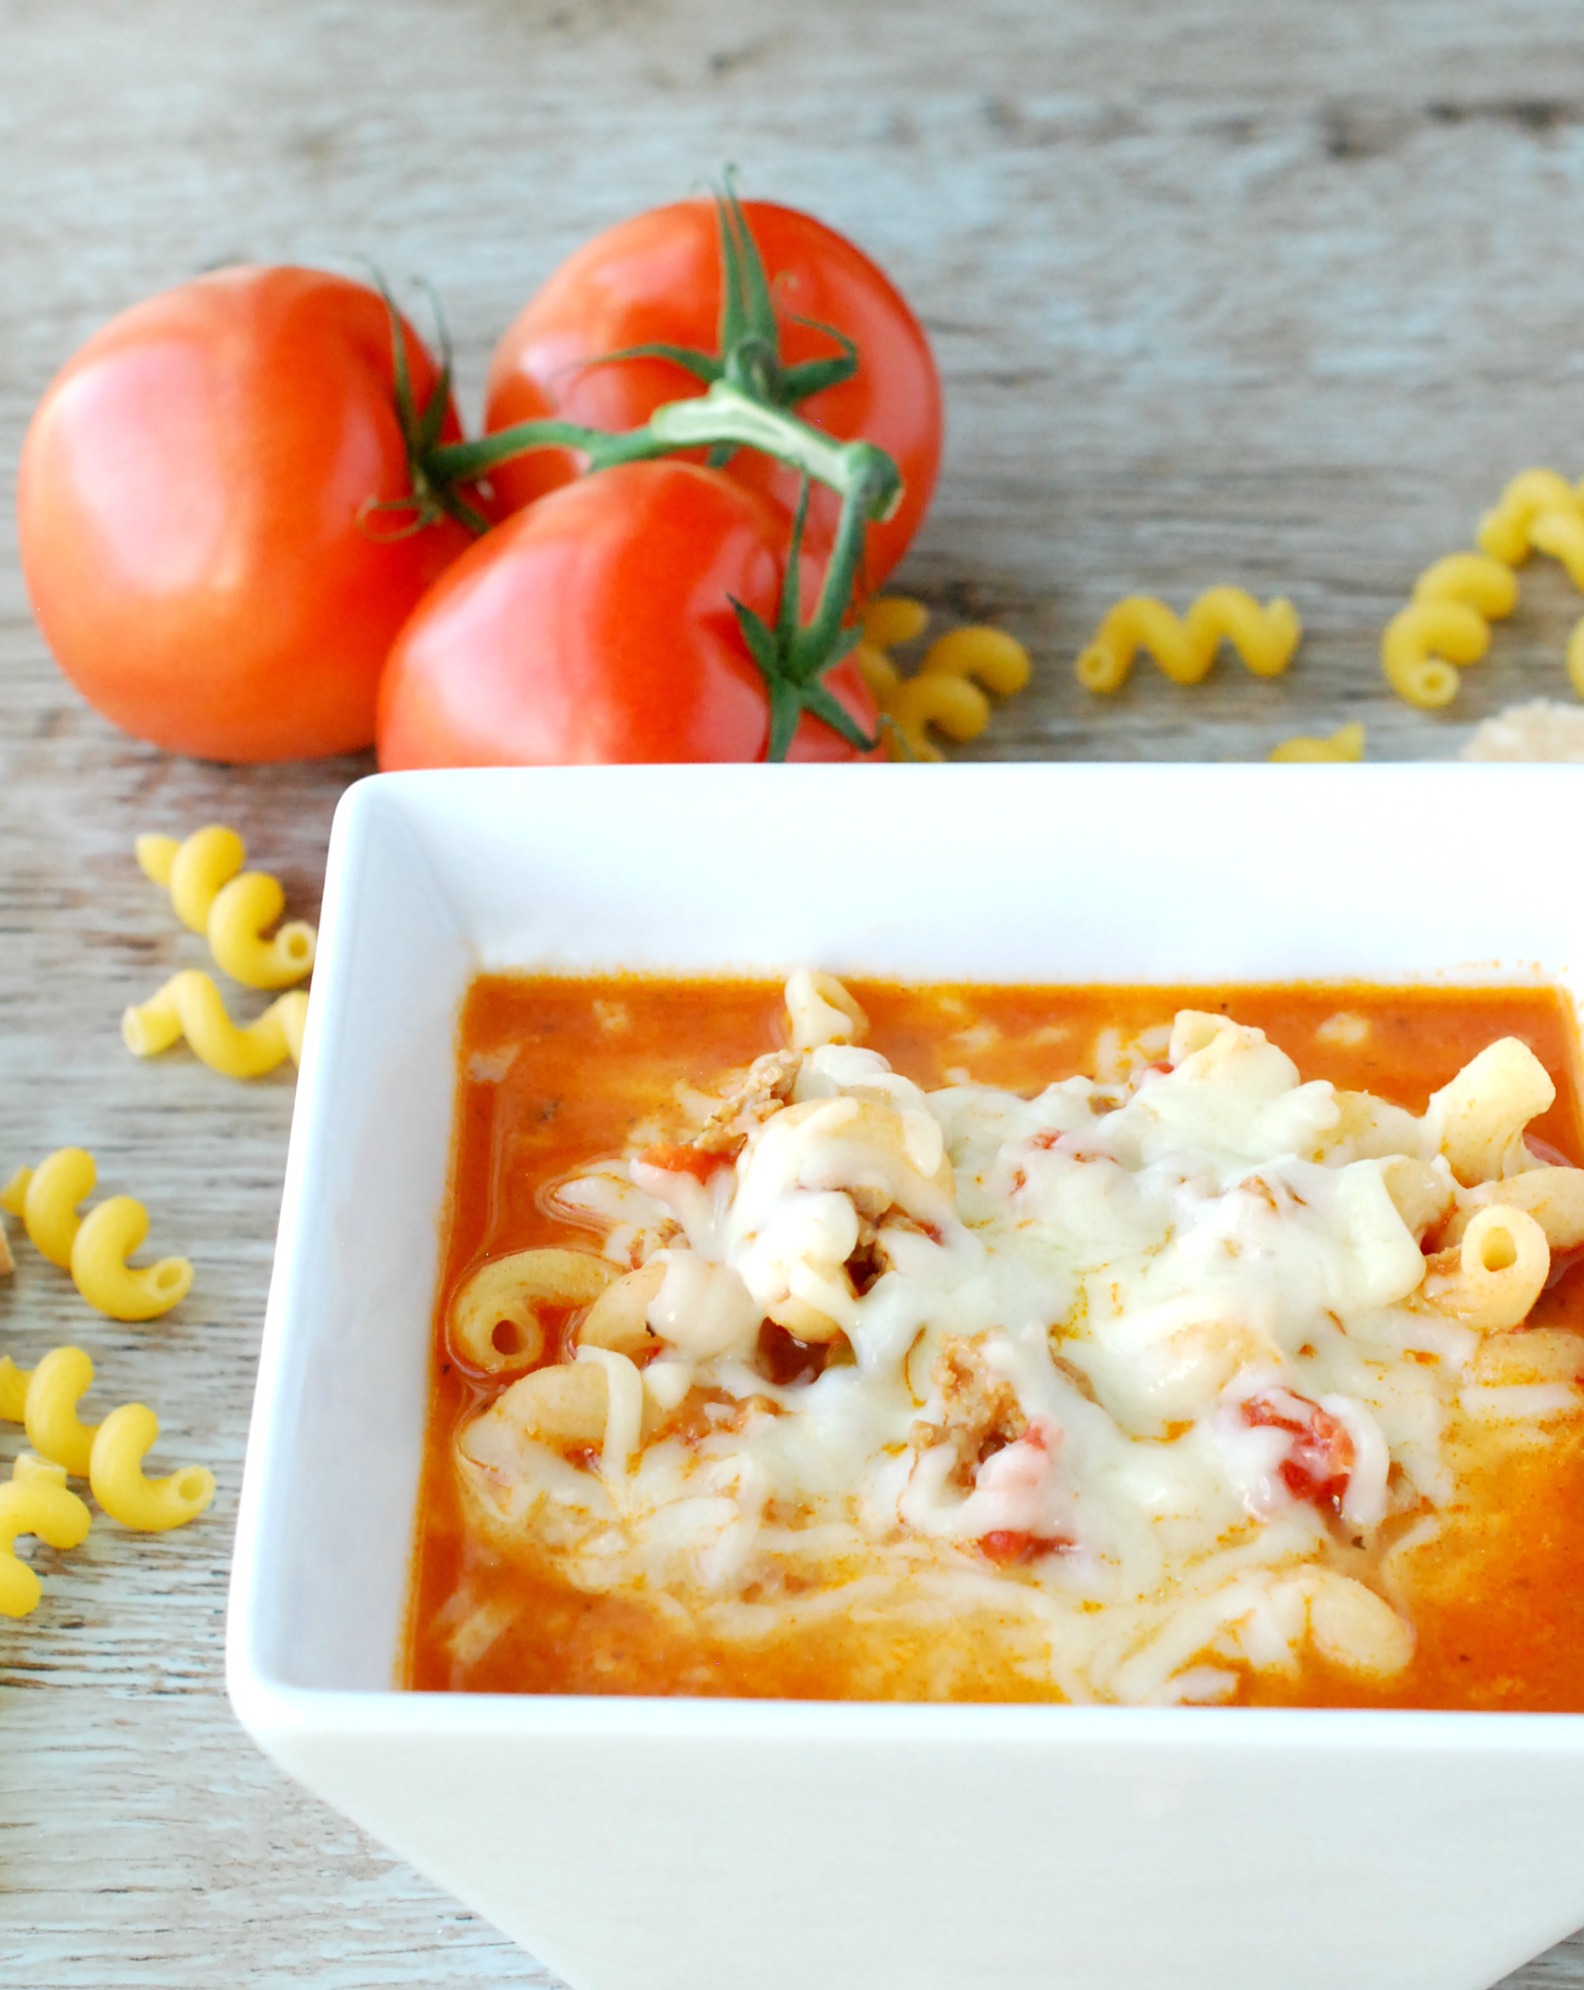 Lasagna soup is a quick, easy, and slightly healthier way to get your lasagna fix!